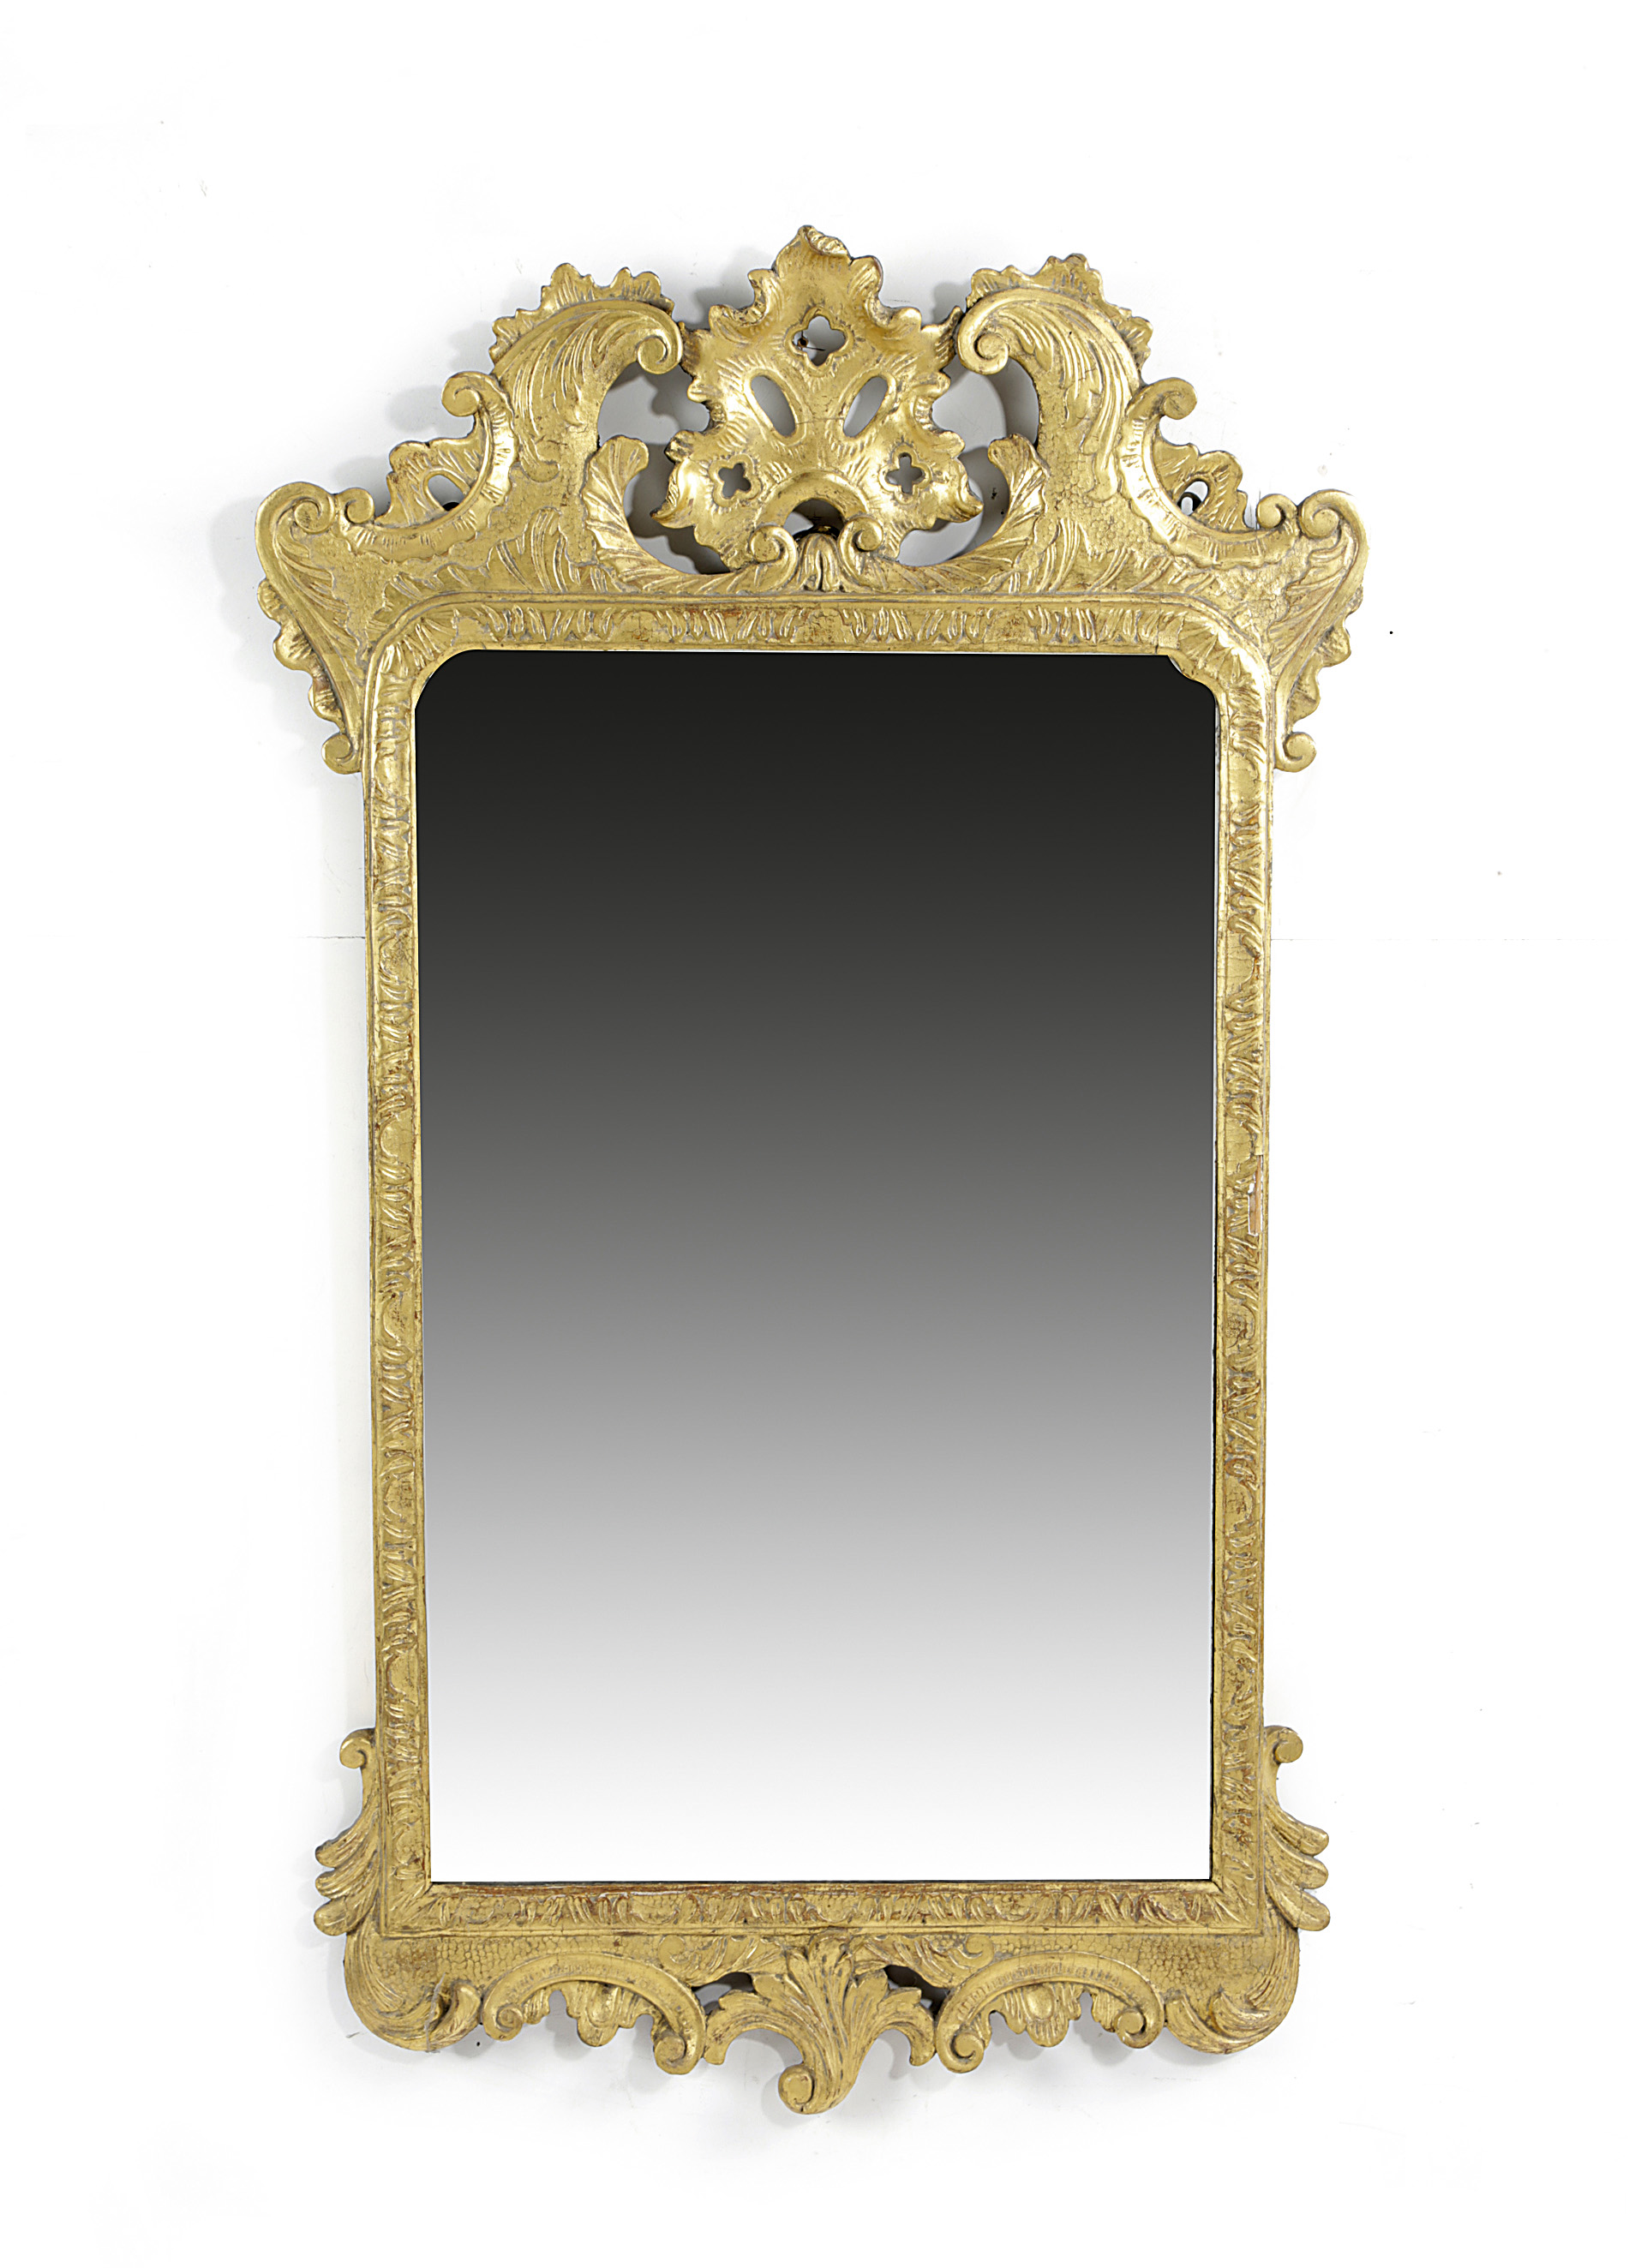 A GEORGE II GILTWOOD WALL MIRROR C.1735 the later arched bevelled plate within a leaf carved